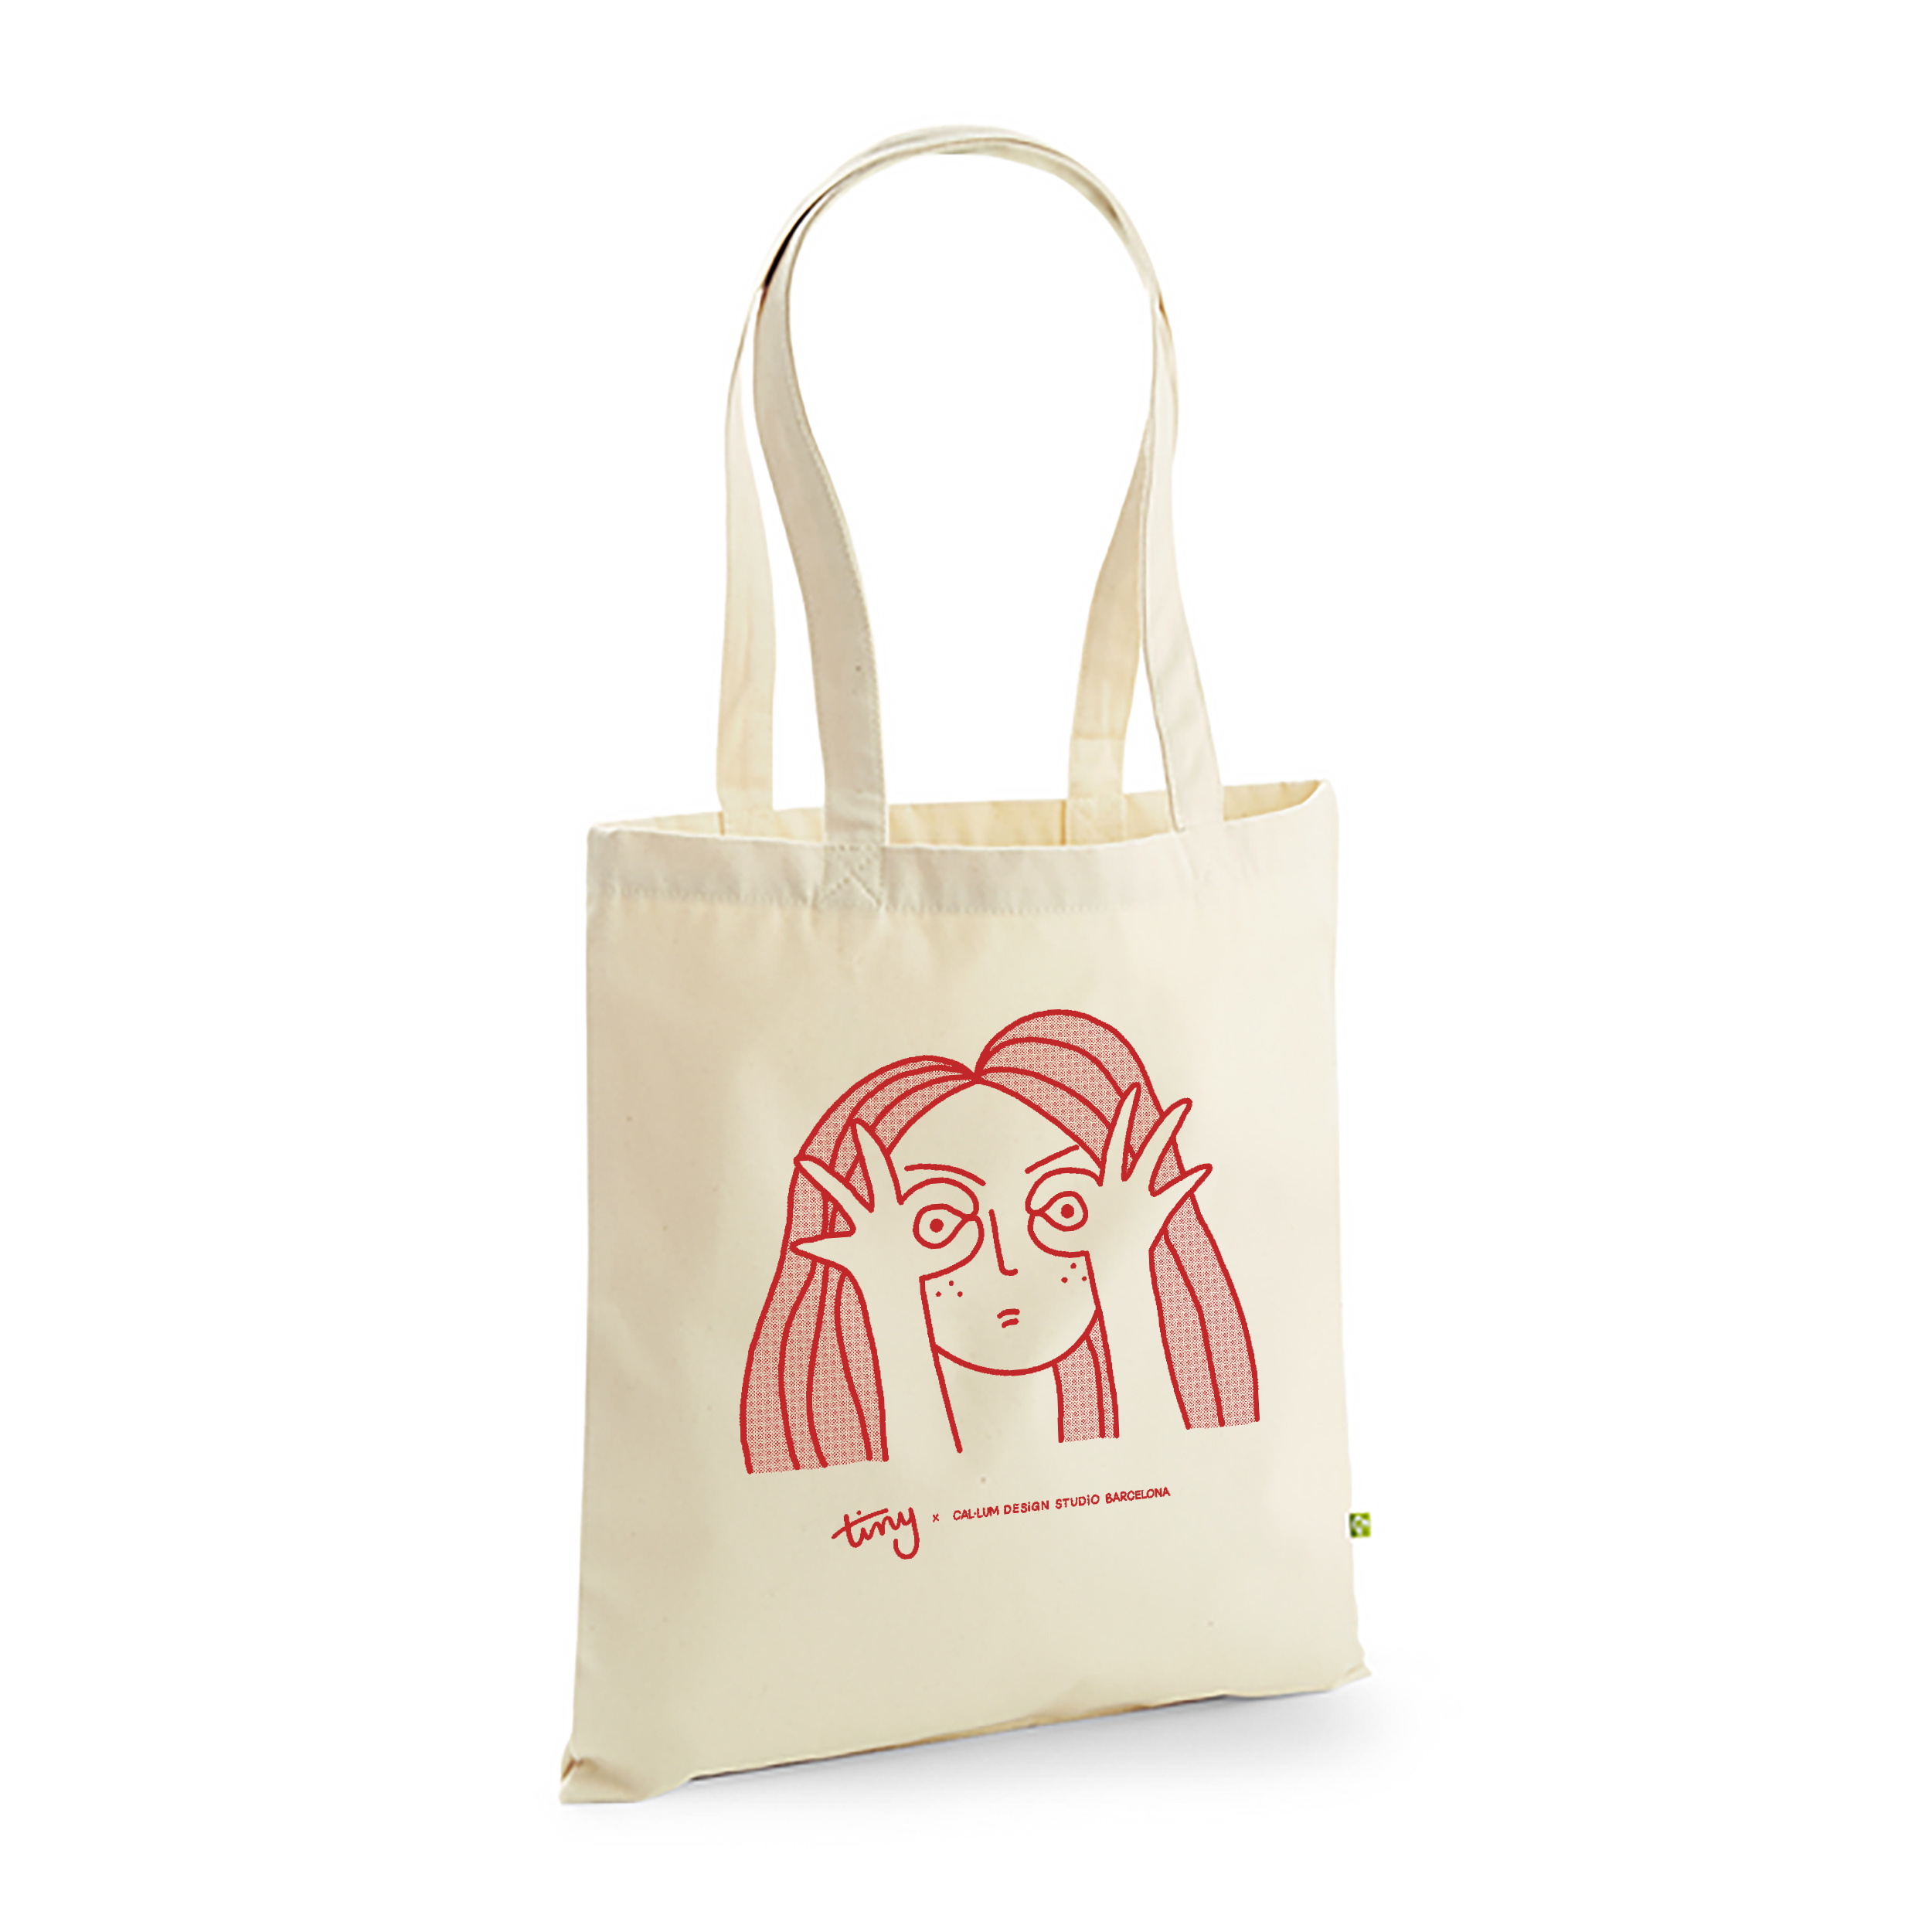 Totebag with a tiny illustration print